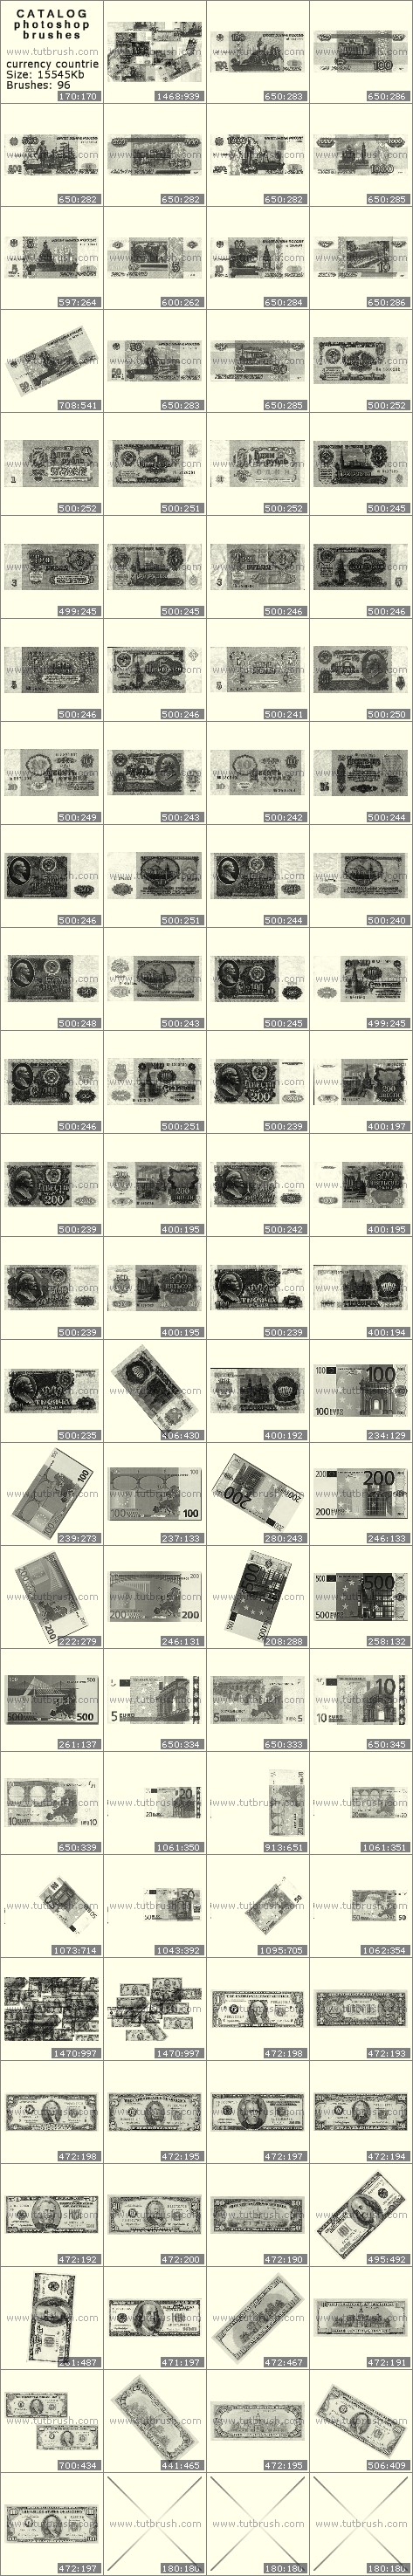 Photoshop brushes Currency countries